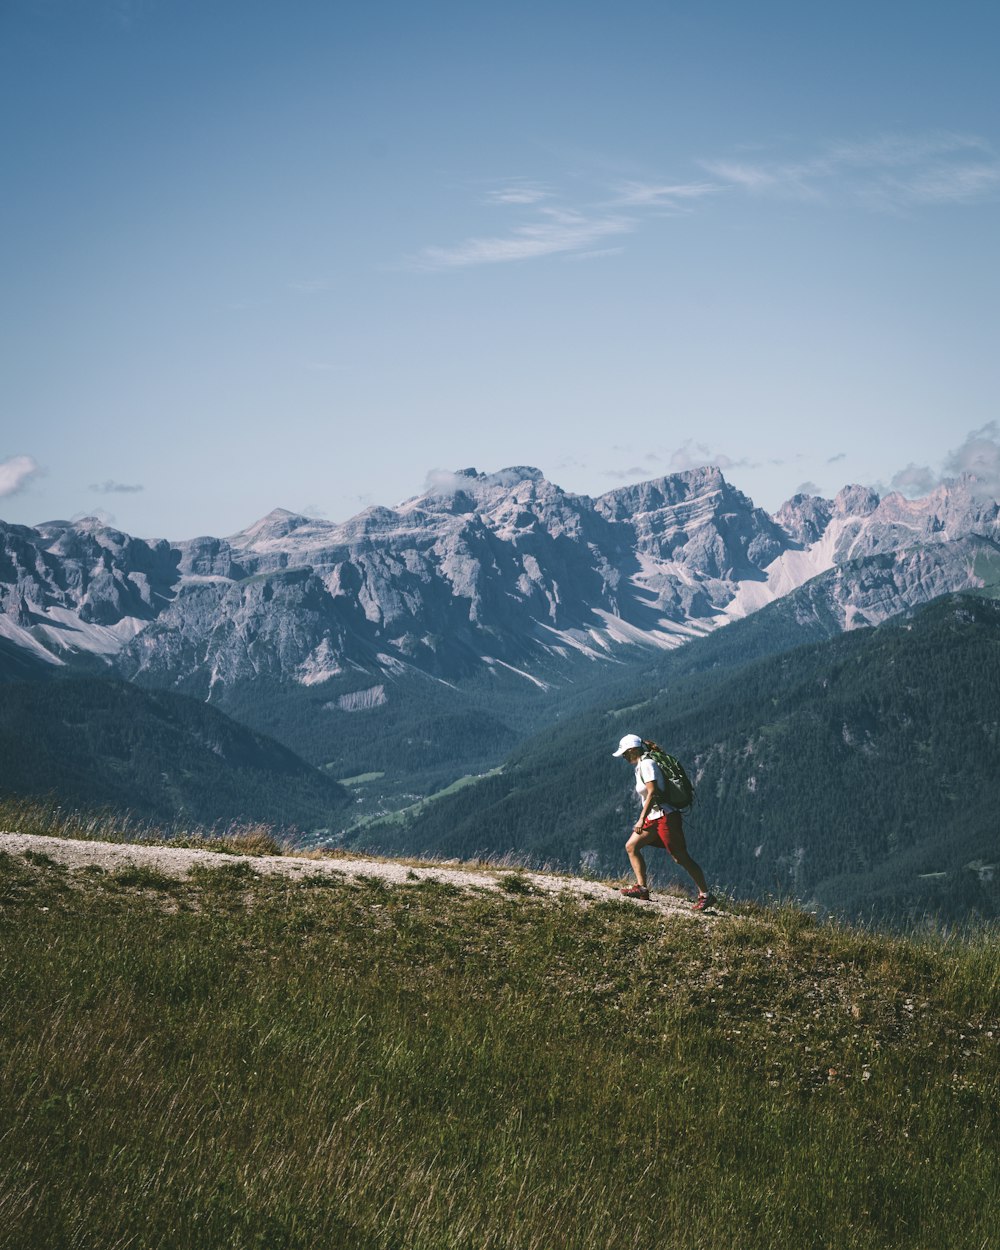 a person hiking up a hill with mountains in the background